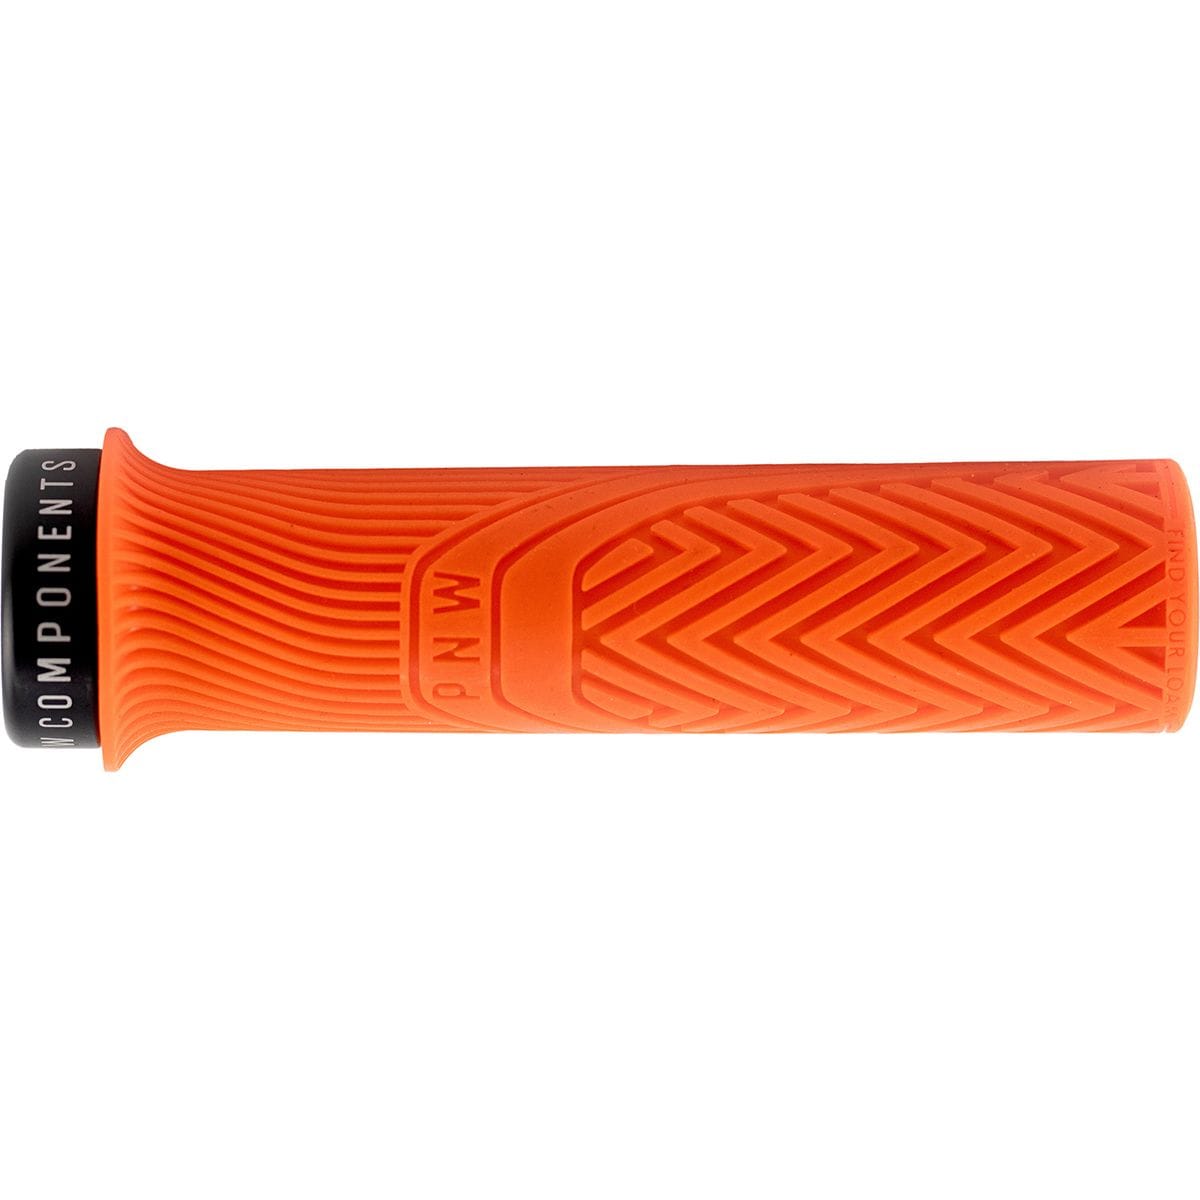 PNW Components Loam Grips Safety Orange, One Size